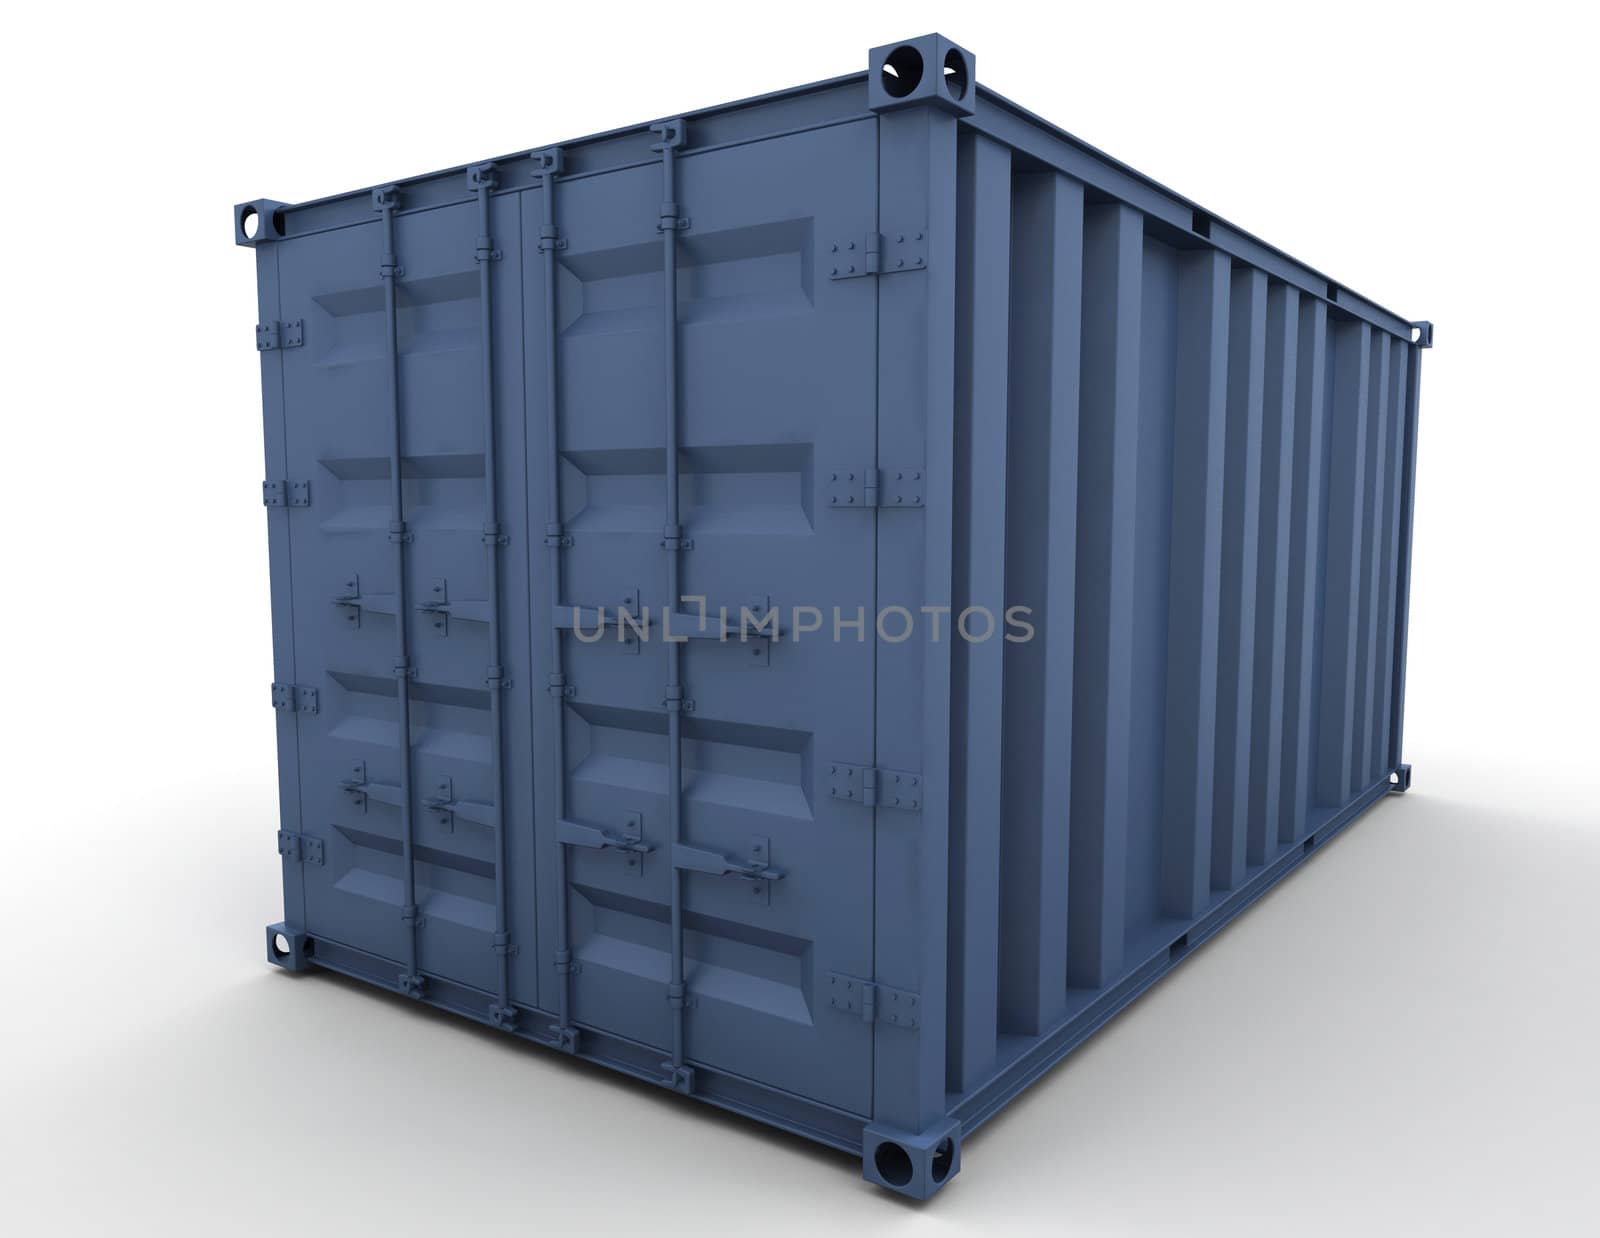 3D render of a freight container